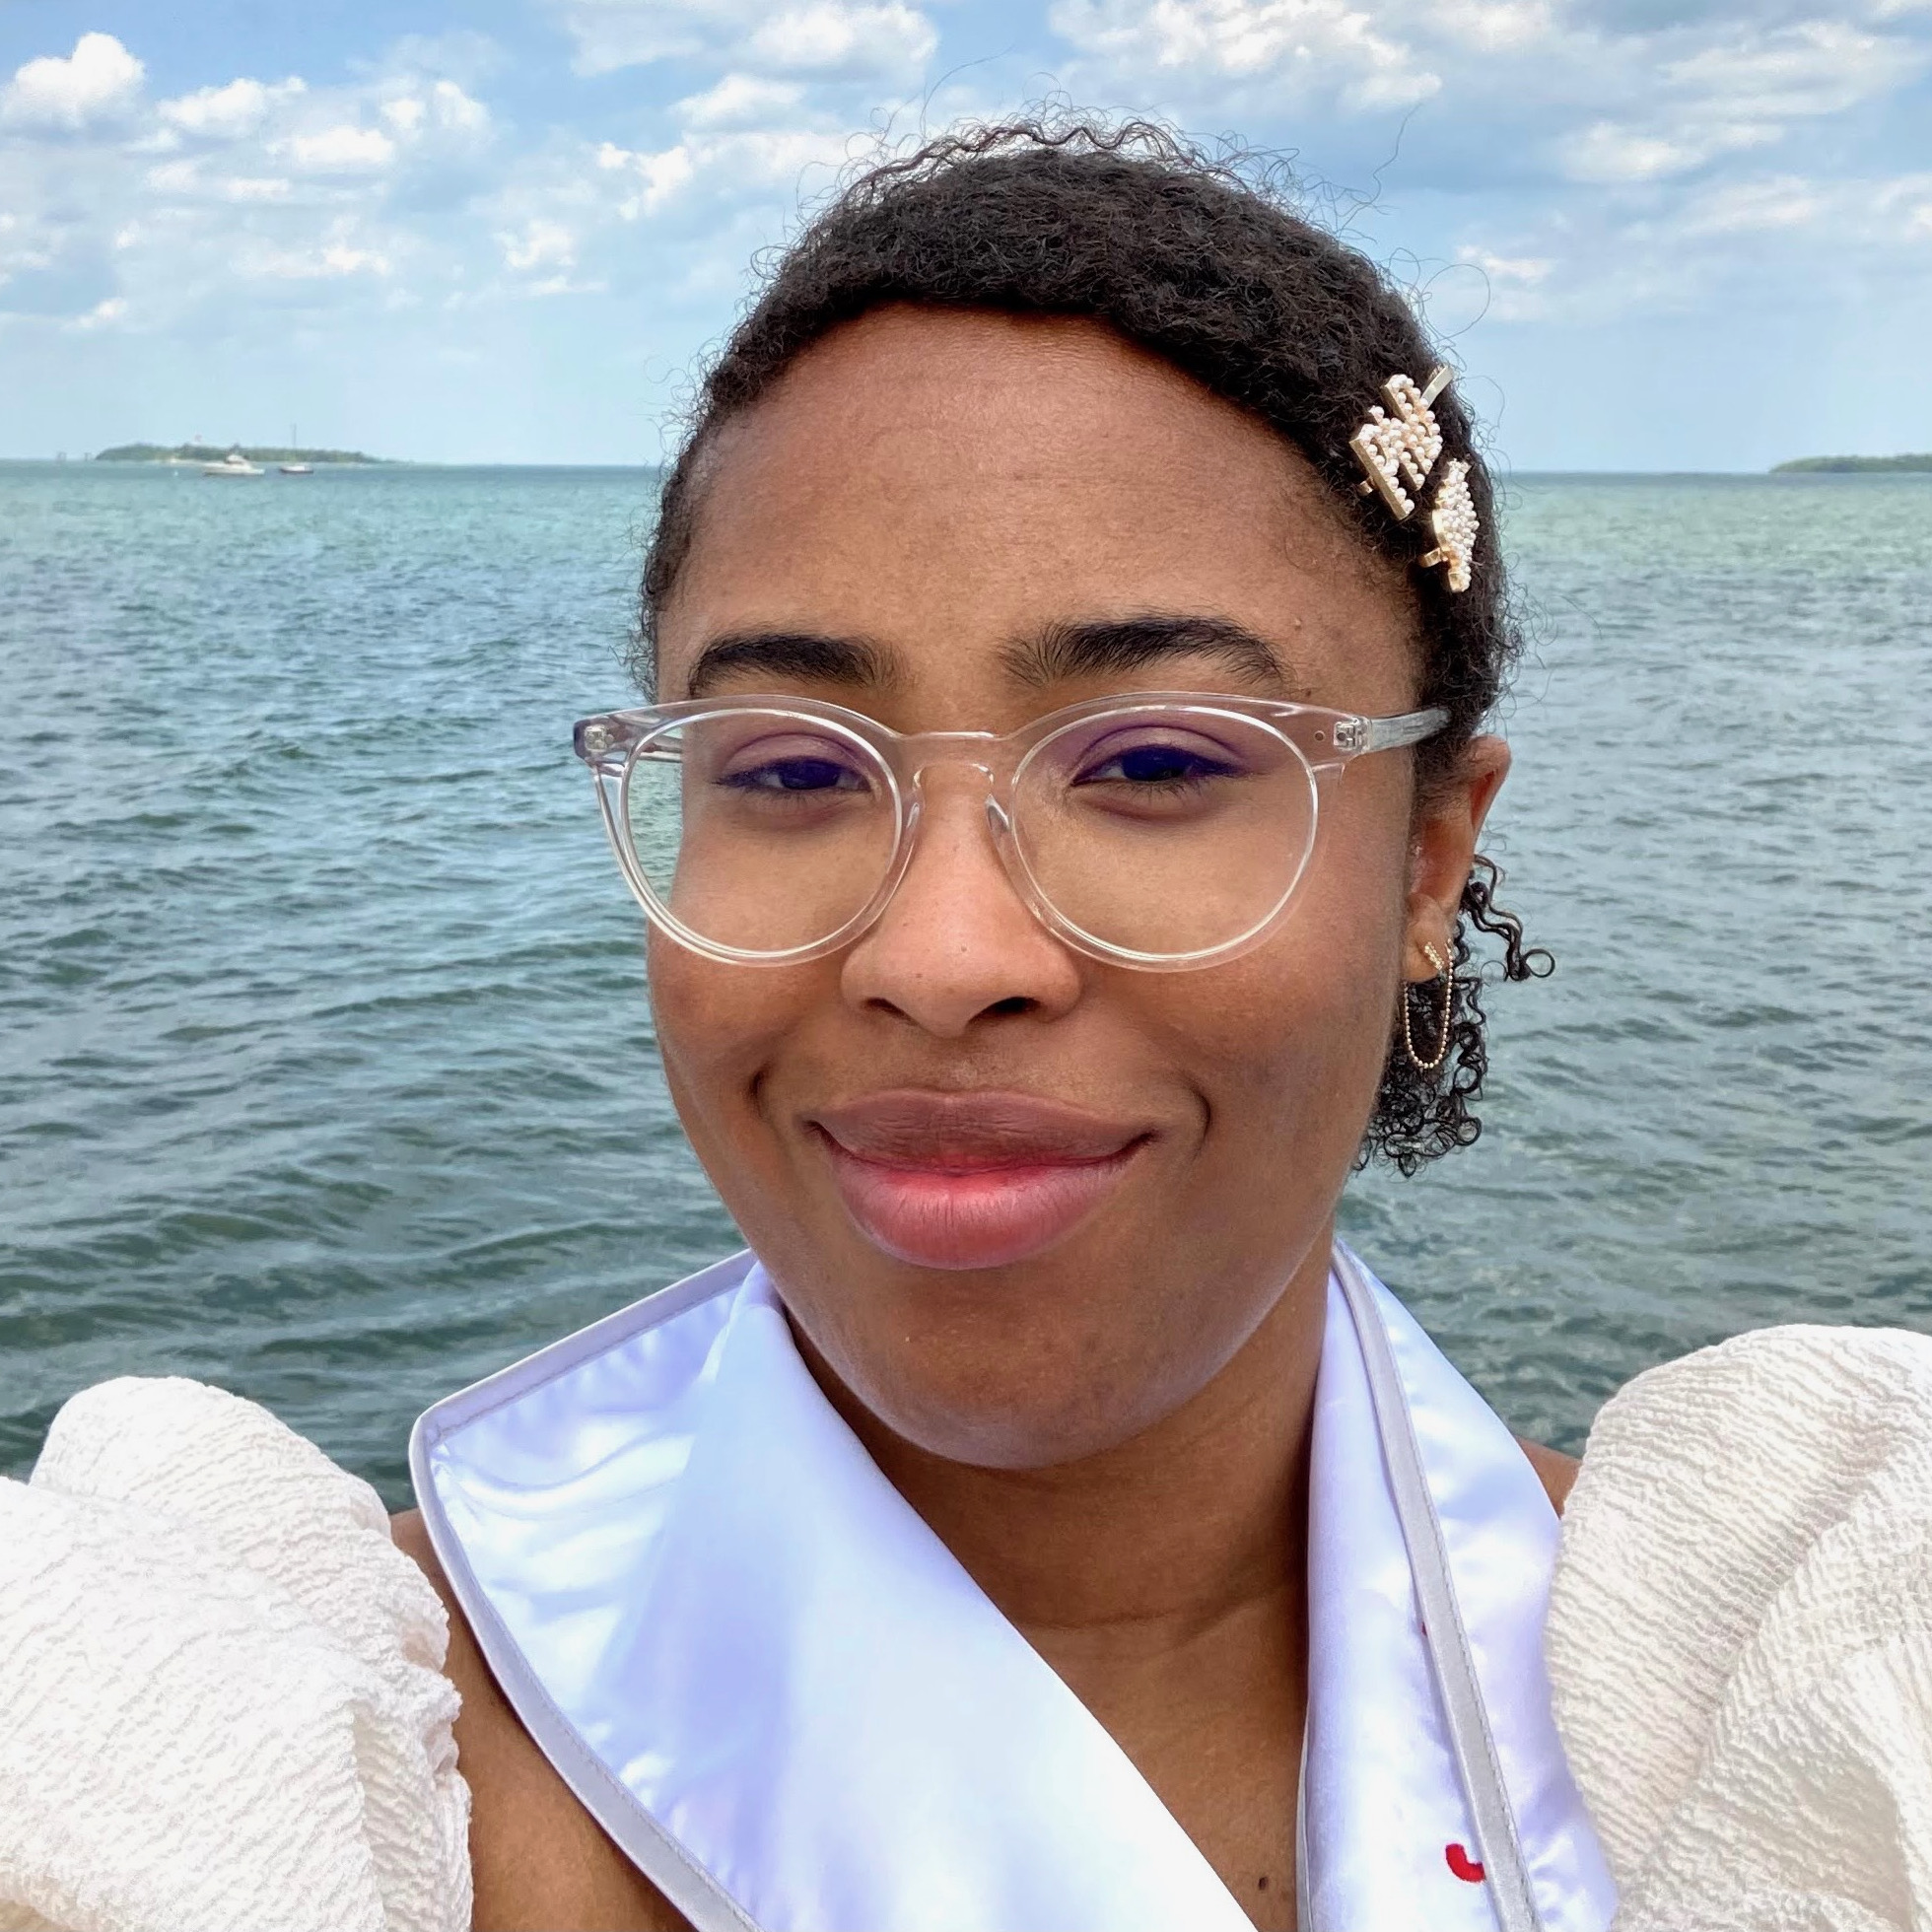 Linguistics PhD student, London Dixon, smiling at the camera, with a calm ocean behind her, and a barrette in her hair that says "PhD"..